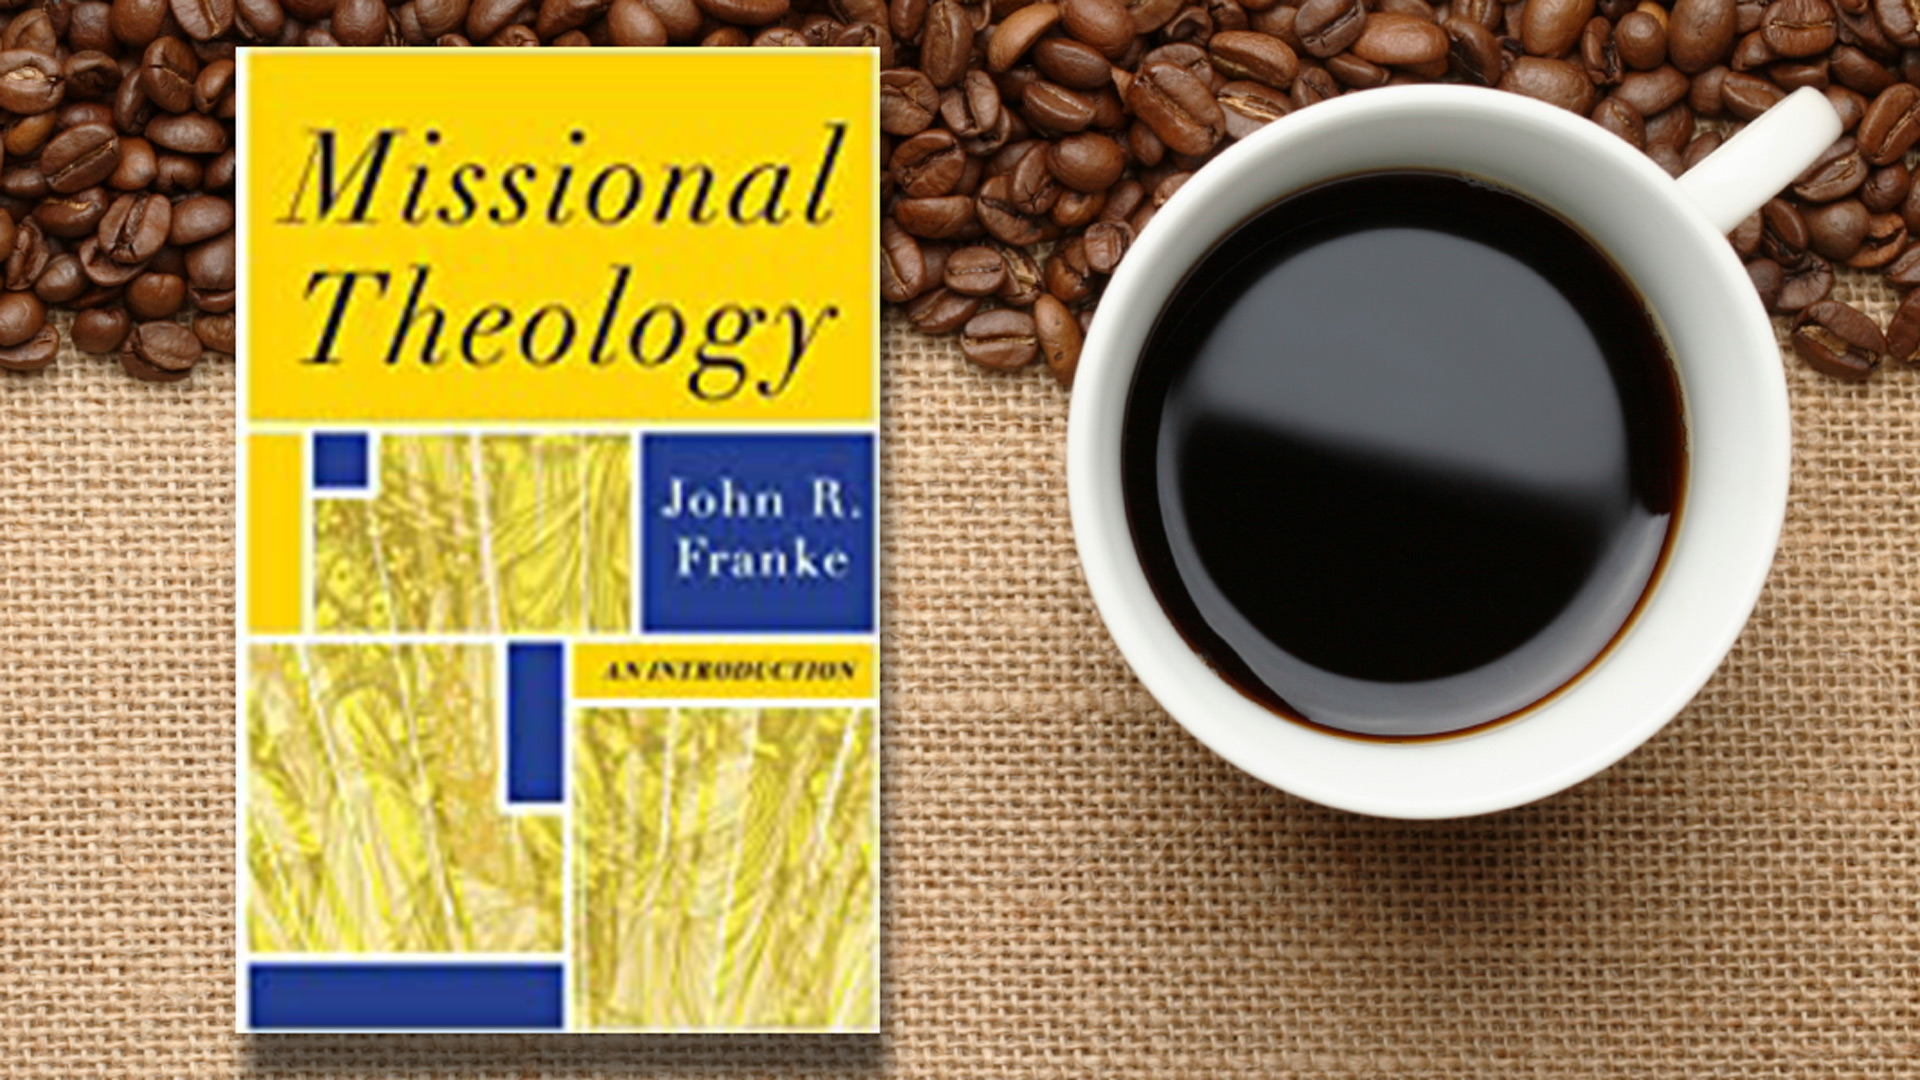 Theology, Thoughts & Coffee 
Book Study: Missional Theology by John Franke
